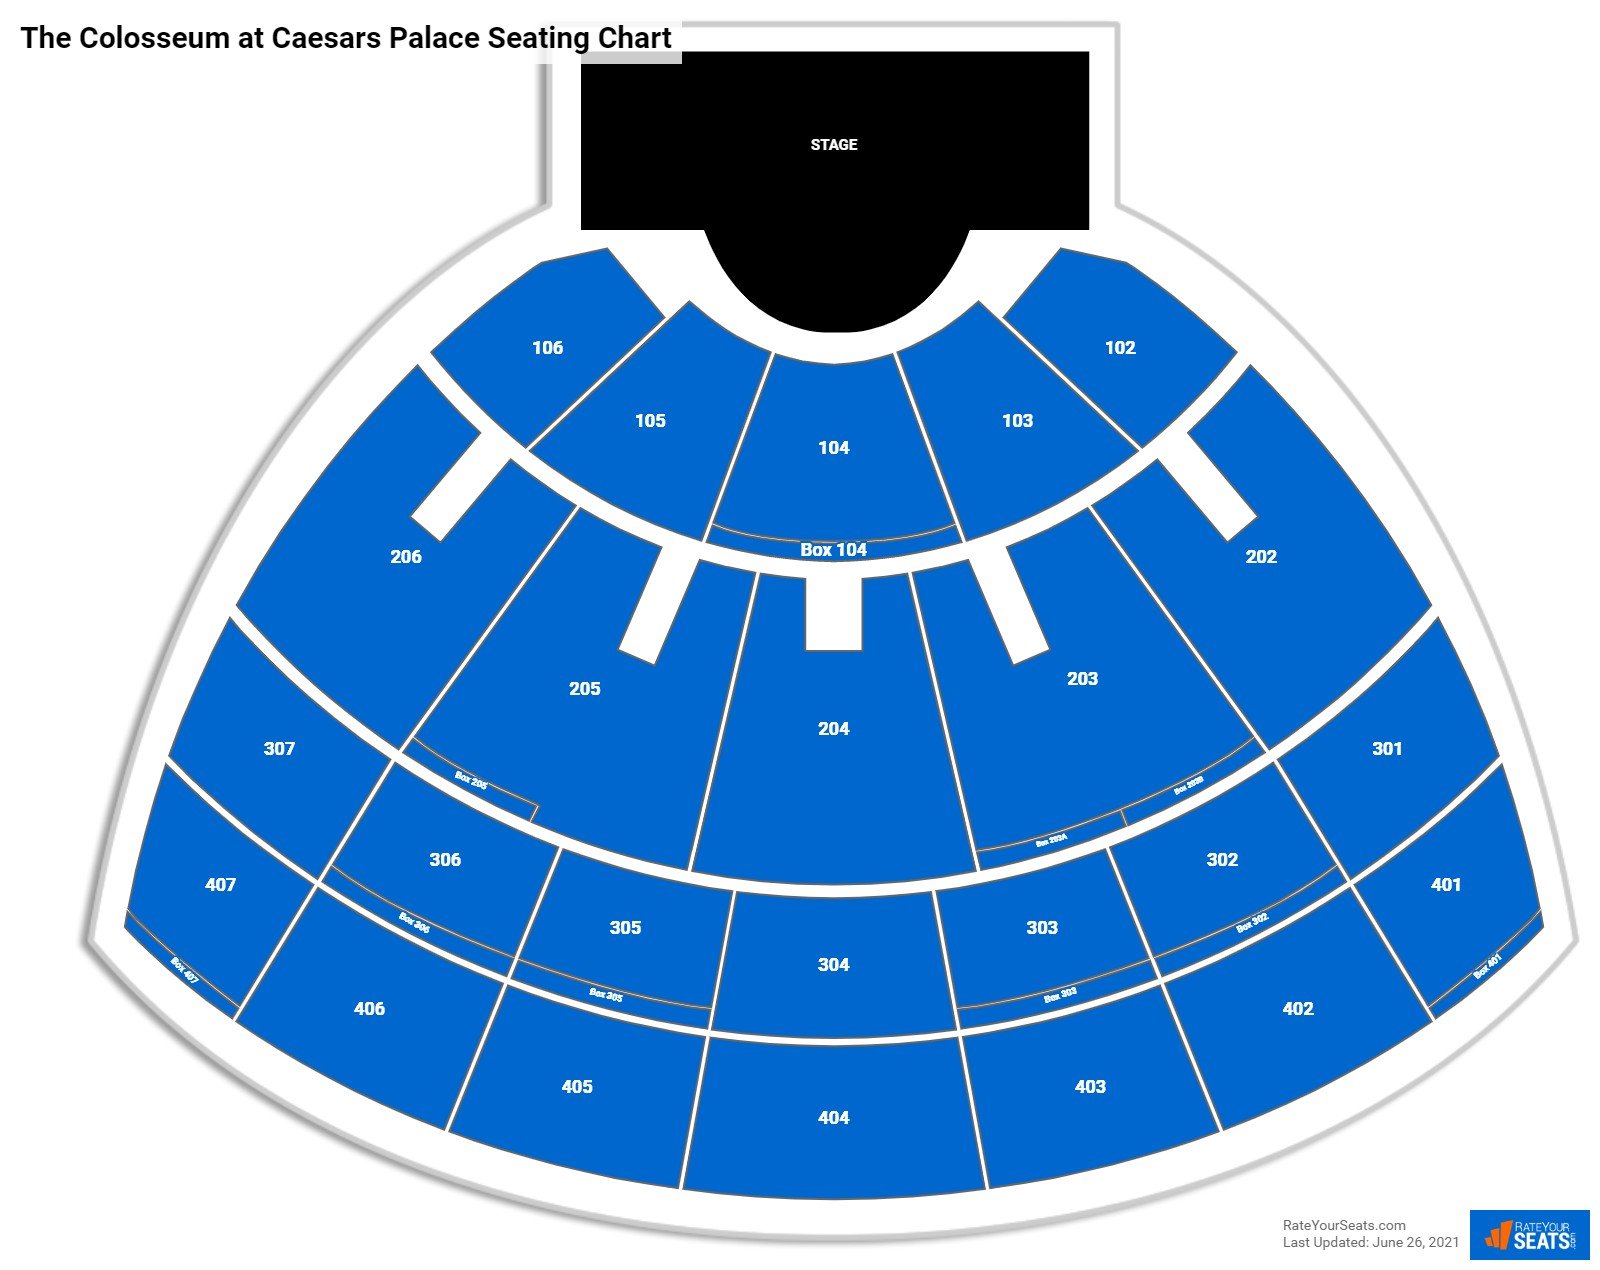 The Colosseum at Caesars Palace Concert Seating Chart